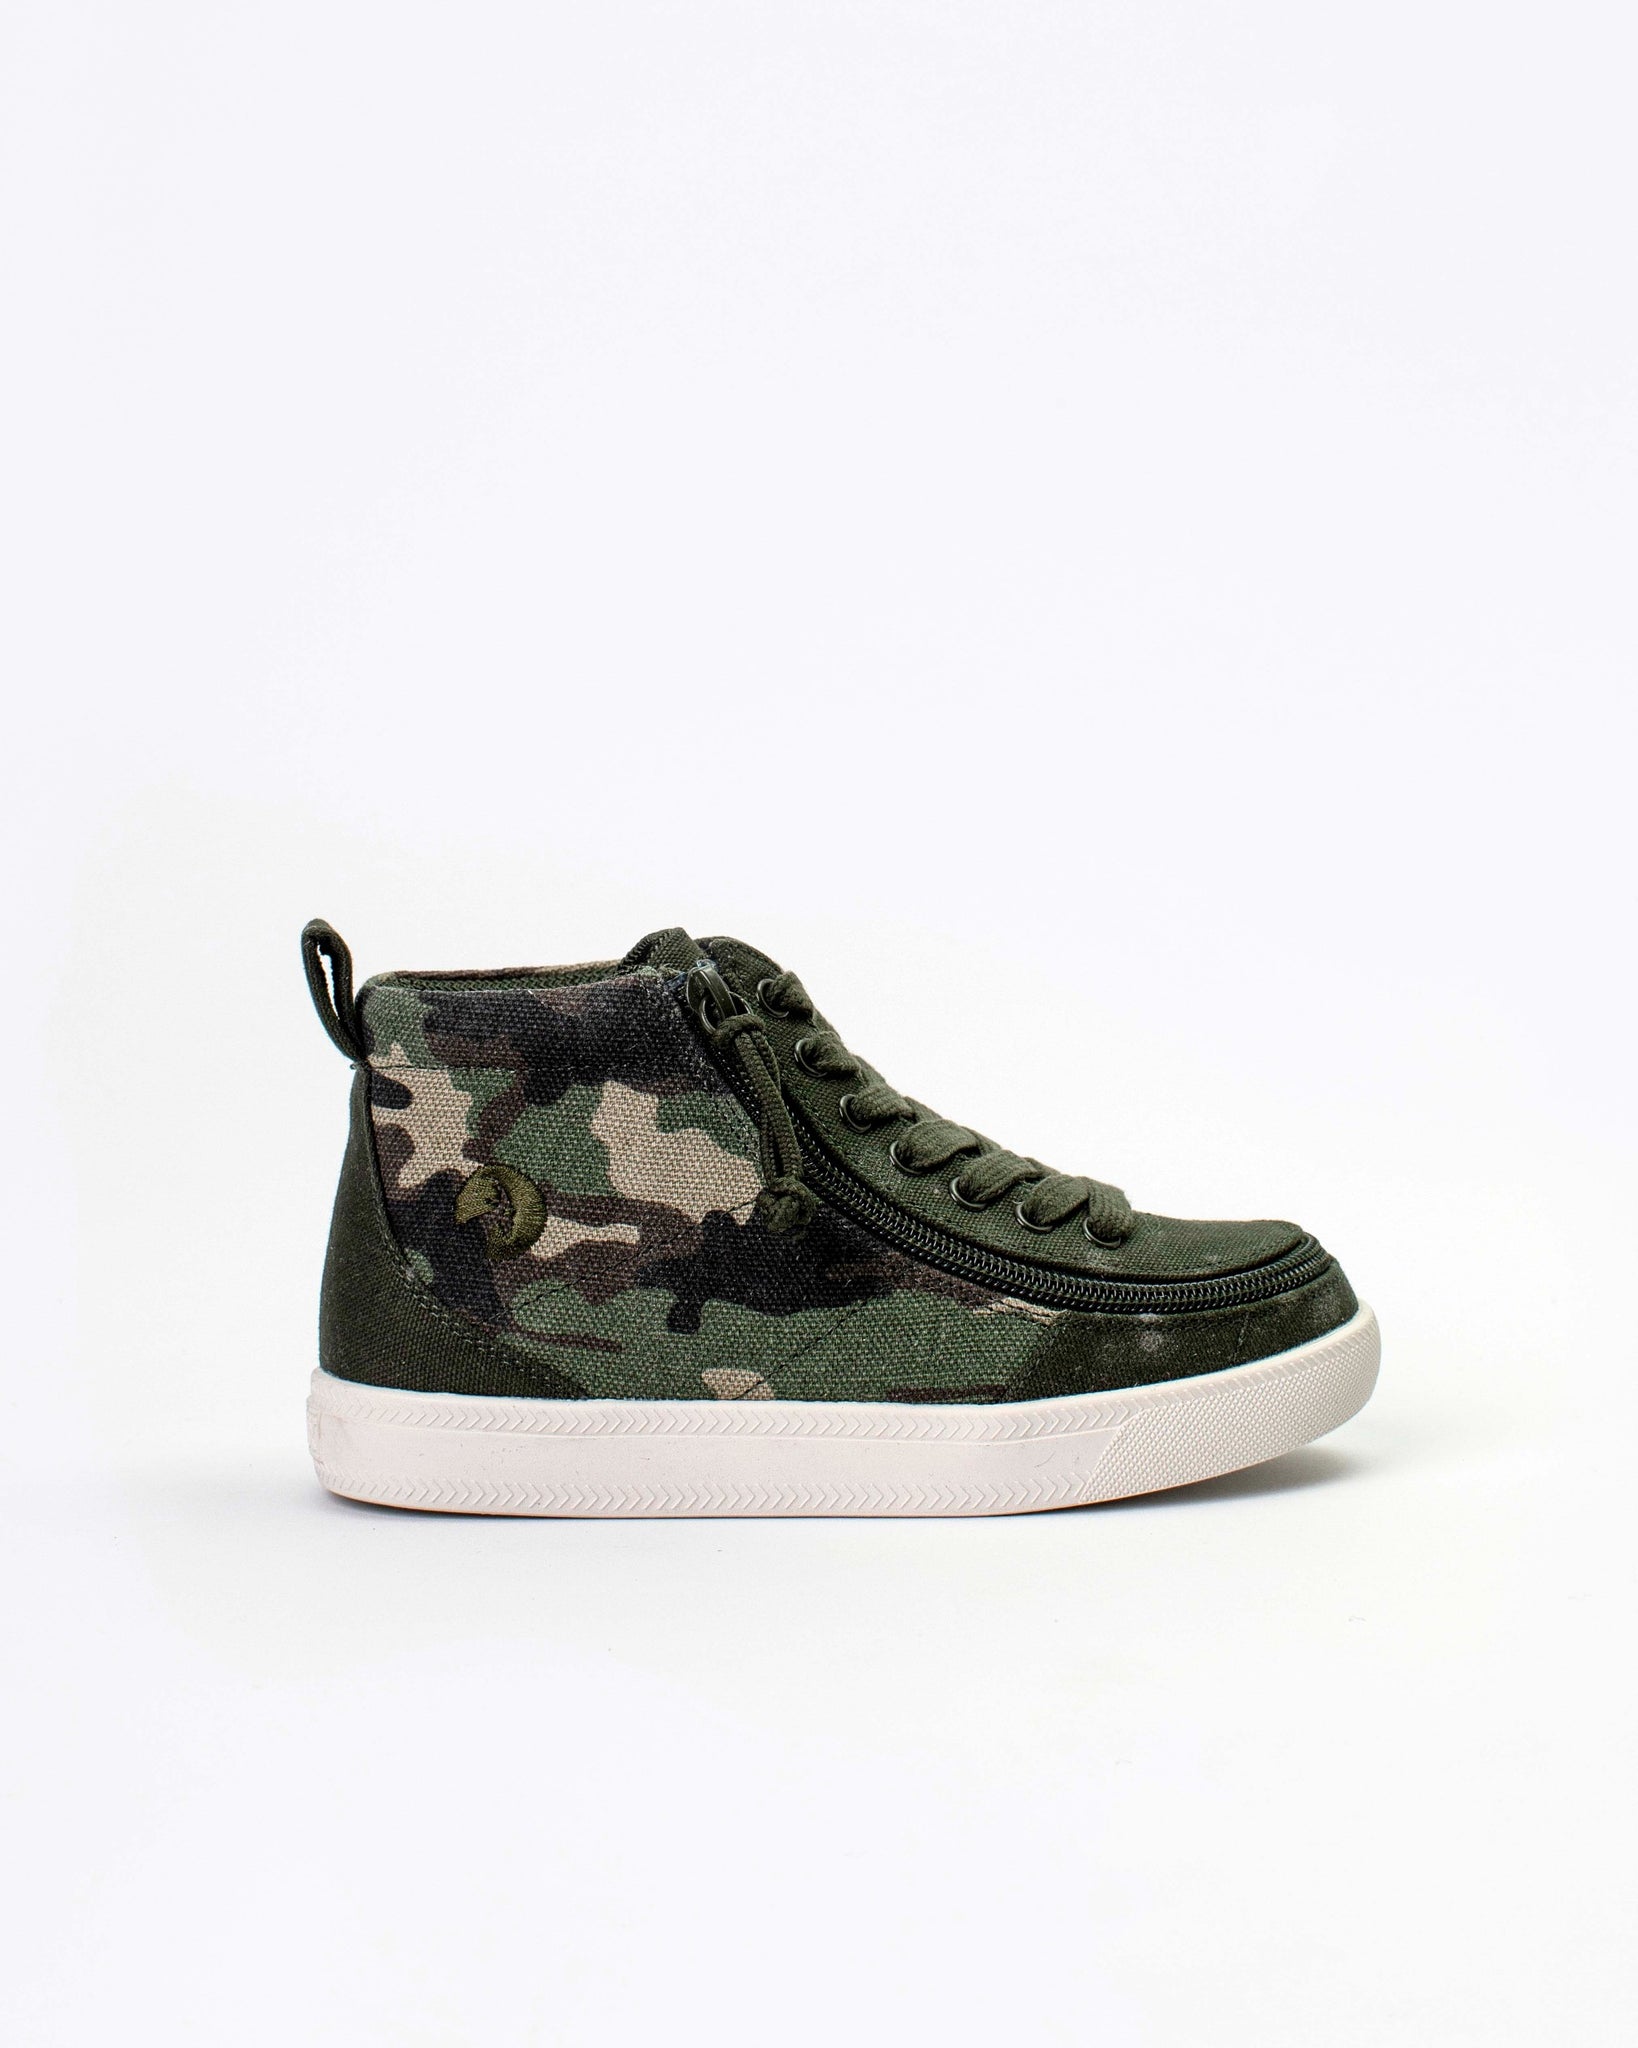 DR High Top (Kids) - Olive Camo